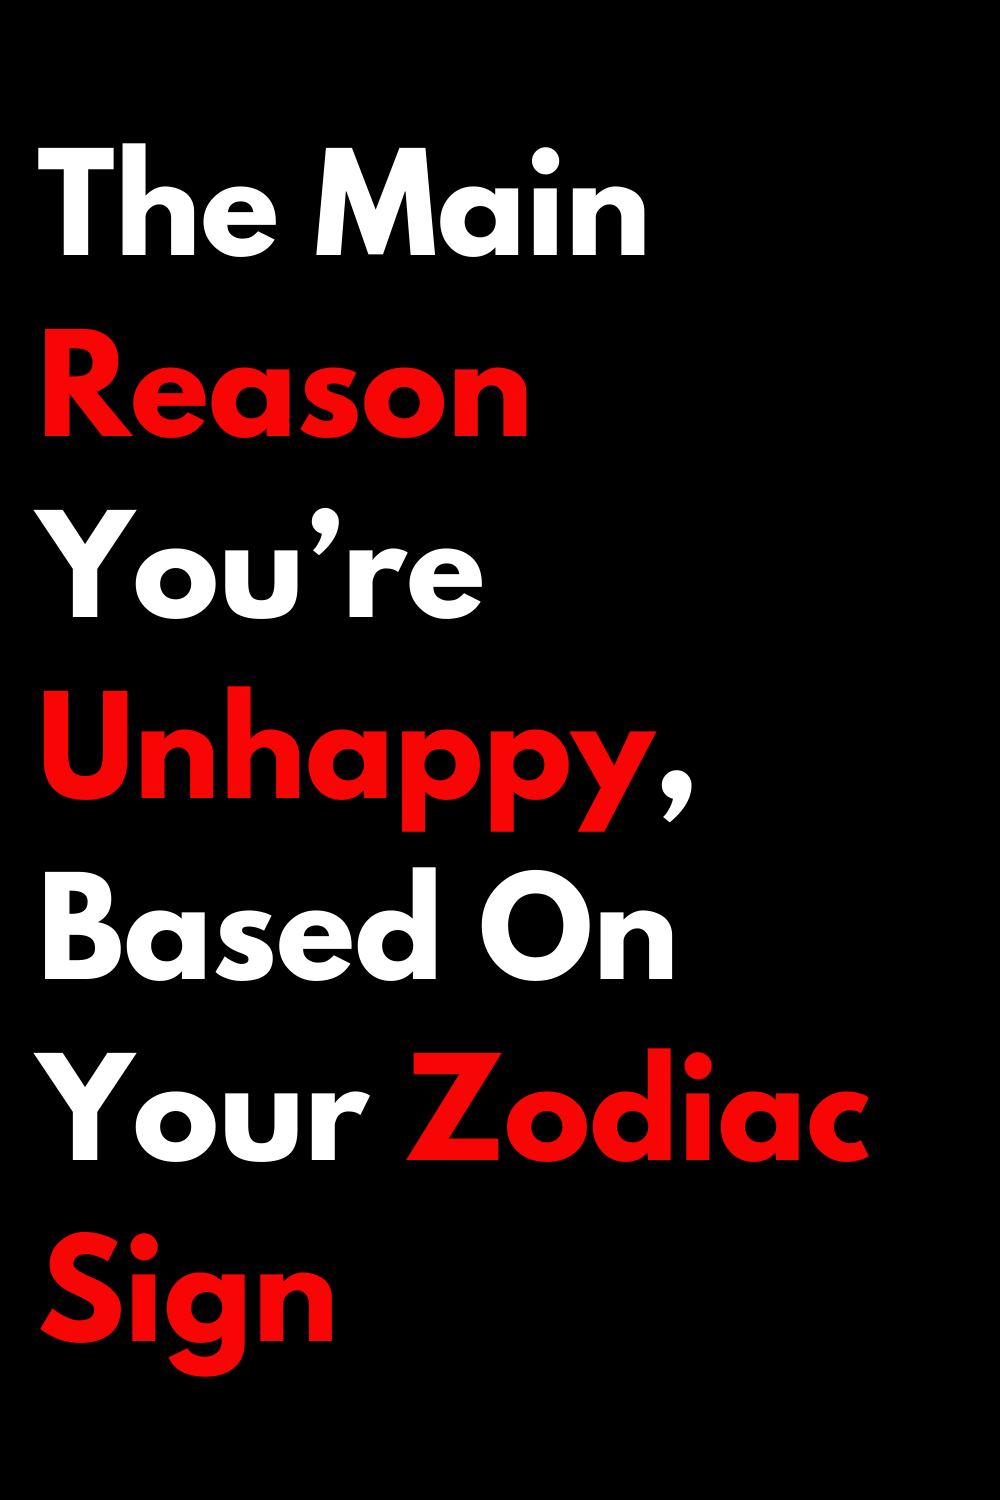 The Main Reason You’re Unhappy, Based On Your Zodiac Sign